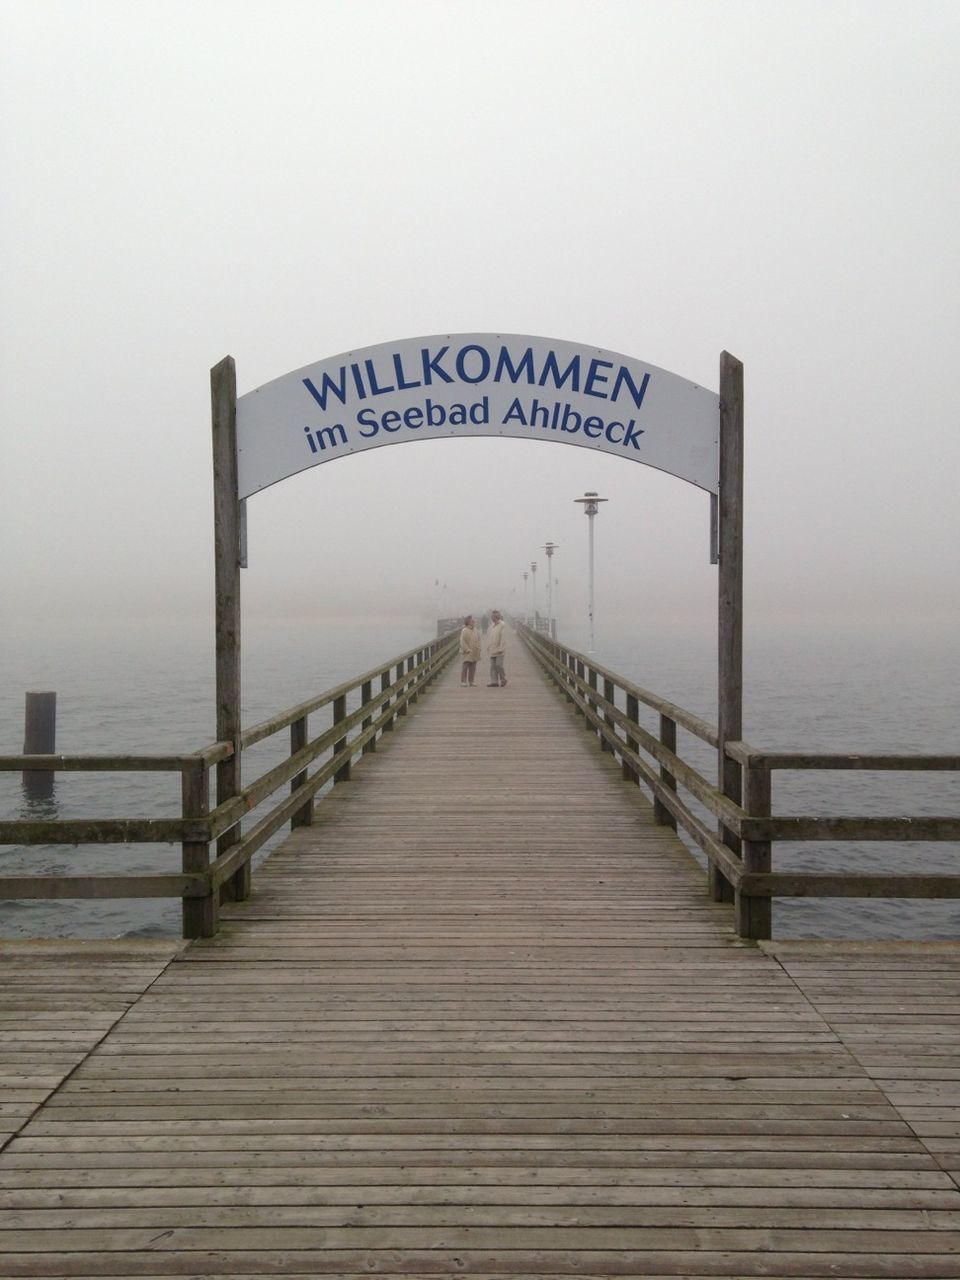 Welcome sign on ahlbeck pier during foggy weather